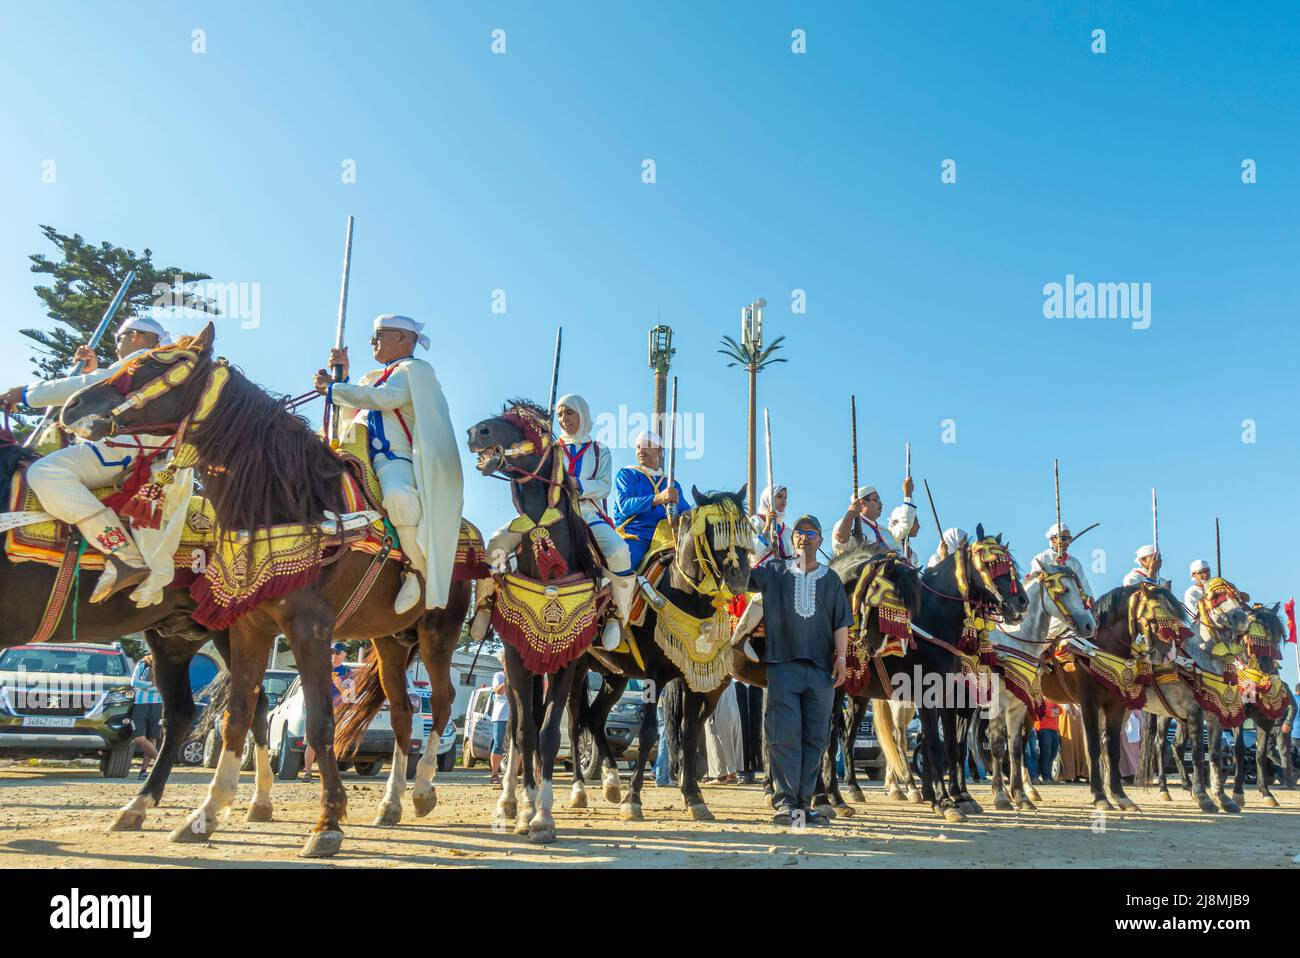 Equestrian Tbourida or Fantasia troupe at Maroc Historic rally 2020 showcase event that took place May 16, 2022 in Essaouira, Morocco Stock Photo